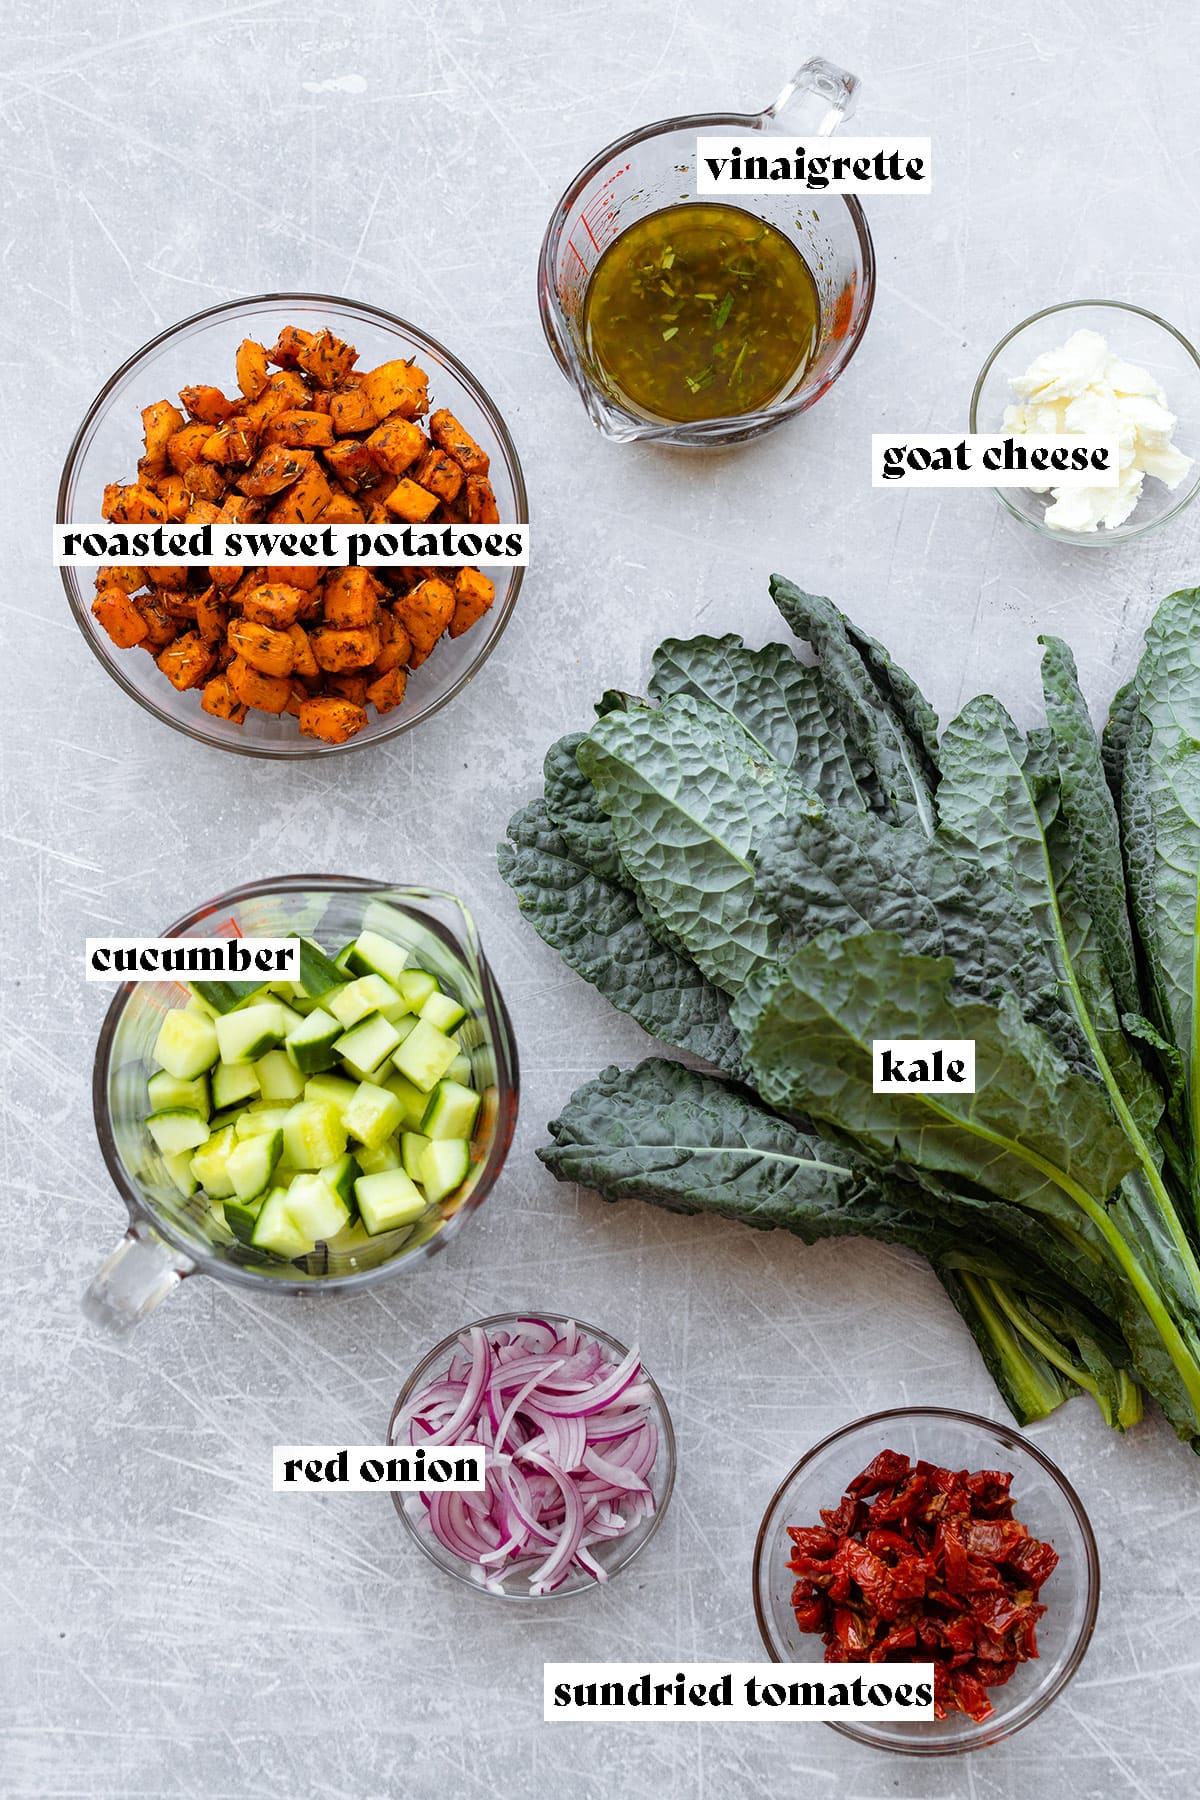 Ingredients for kale salad laid out on a light metal background.